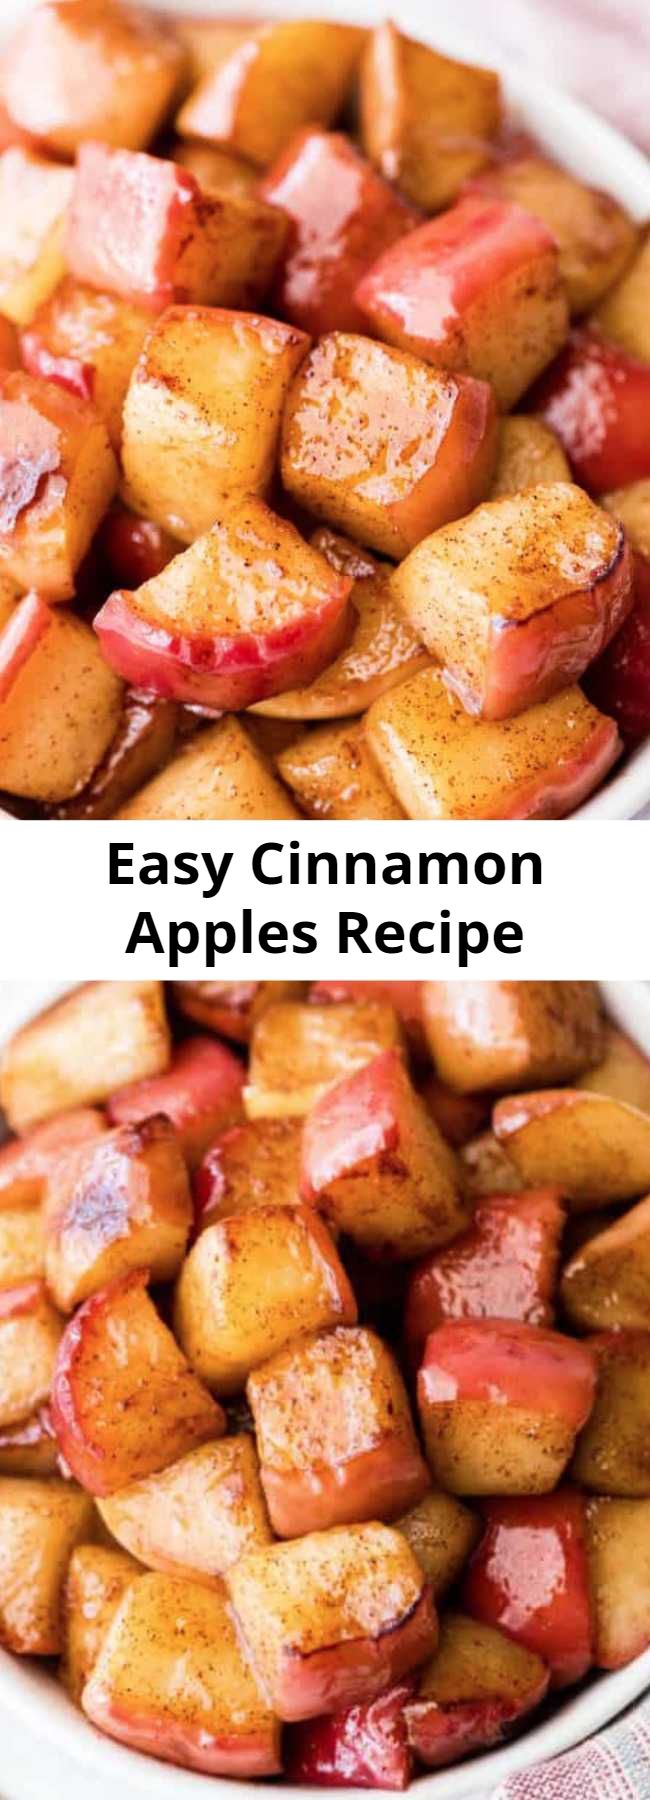 Easy Cinnamon Apples Recipe - These Stovetop Sautéed Cinnamon Apples taste like a warm apple pie, but they come together in 5 minutes and are SO much healthier! This recipe makes a perfect for breakfast, a snack, or dessert and is gluten, dairy and refined sugar free!